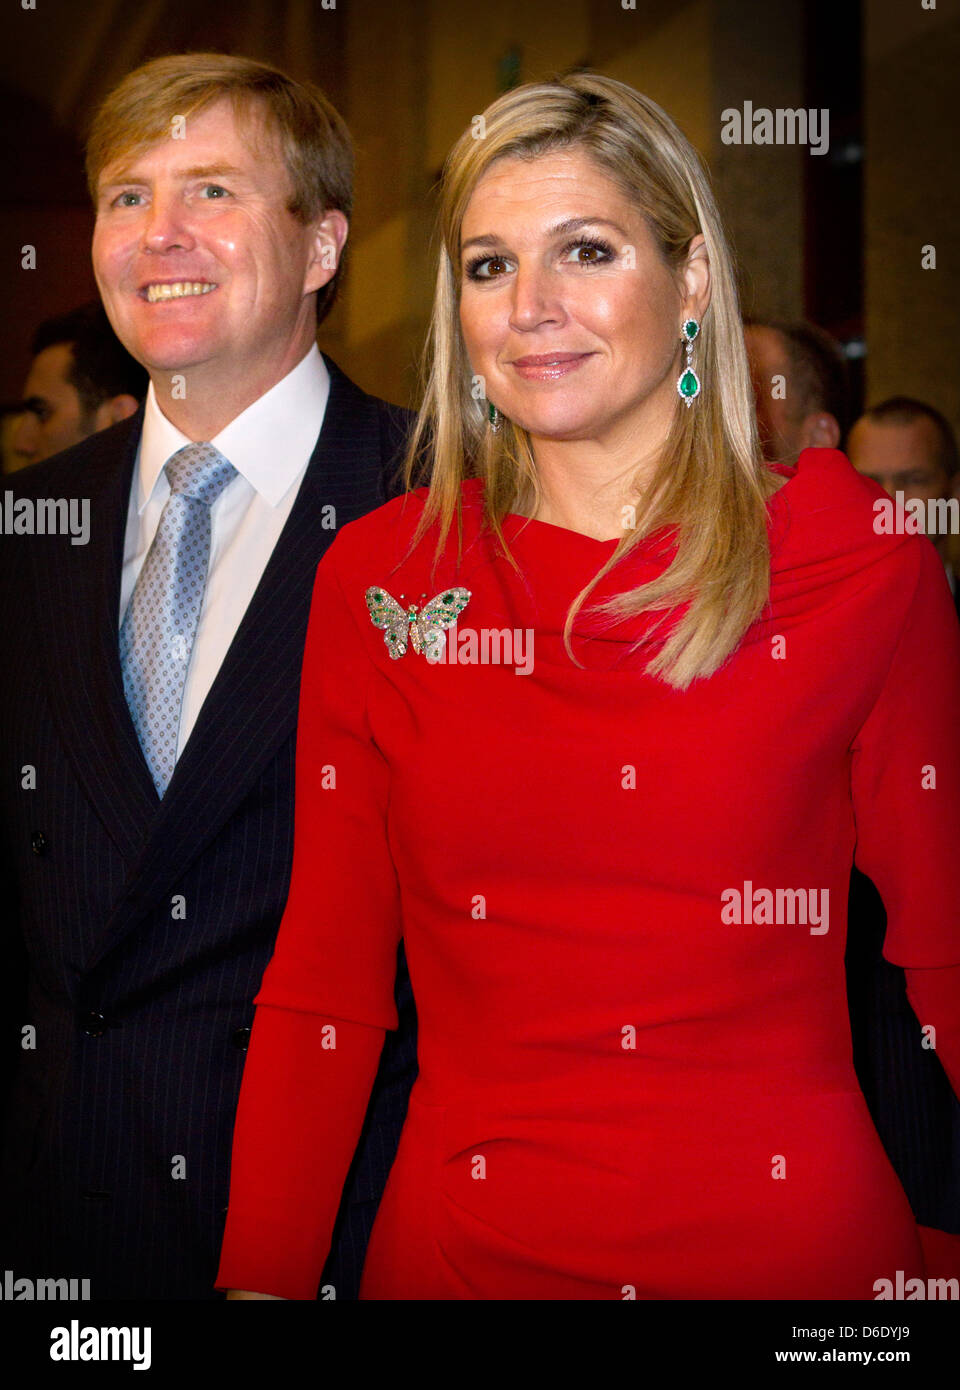 Prince Willem-Alexander and Princess Maxima of The Netherlands attend a concert of the concertgebouworkest at the Halic Centre Concert in Istanbul, Turkey, 10 November 2012. Photo: Patrick van Katwijk - NETHERLANDS OUT Stock Photo